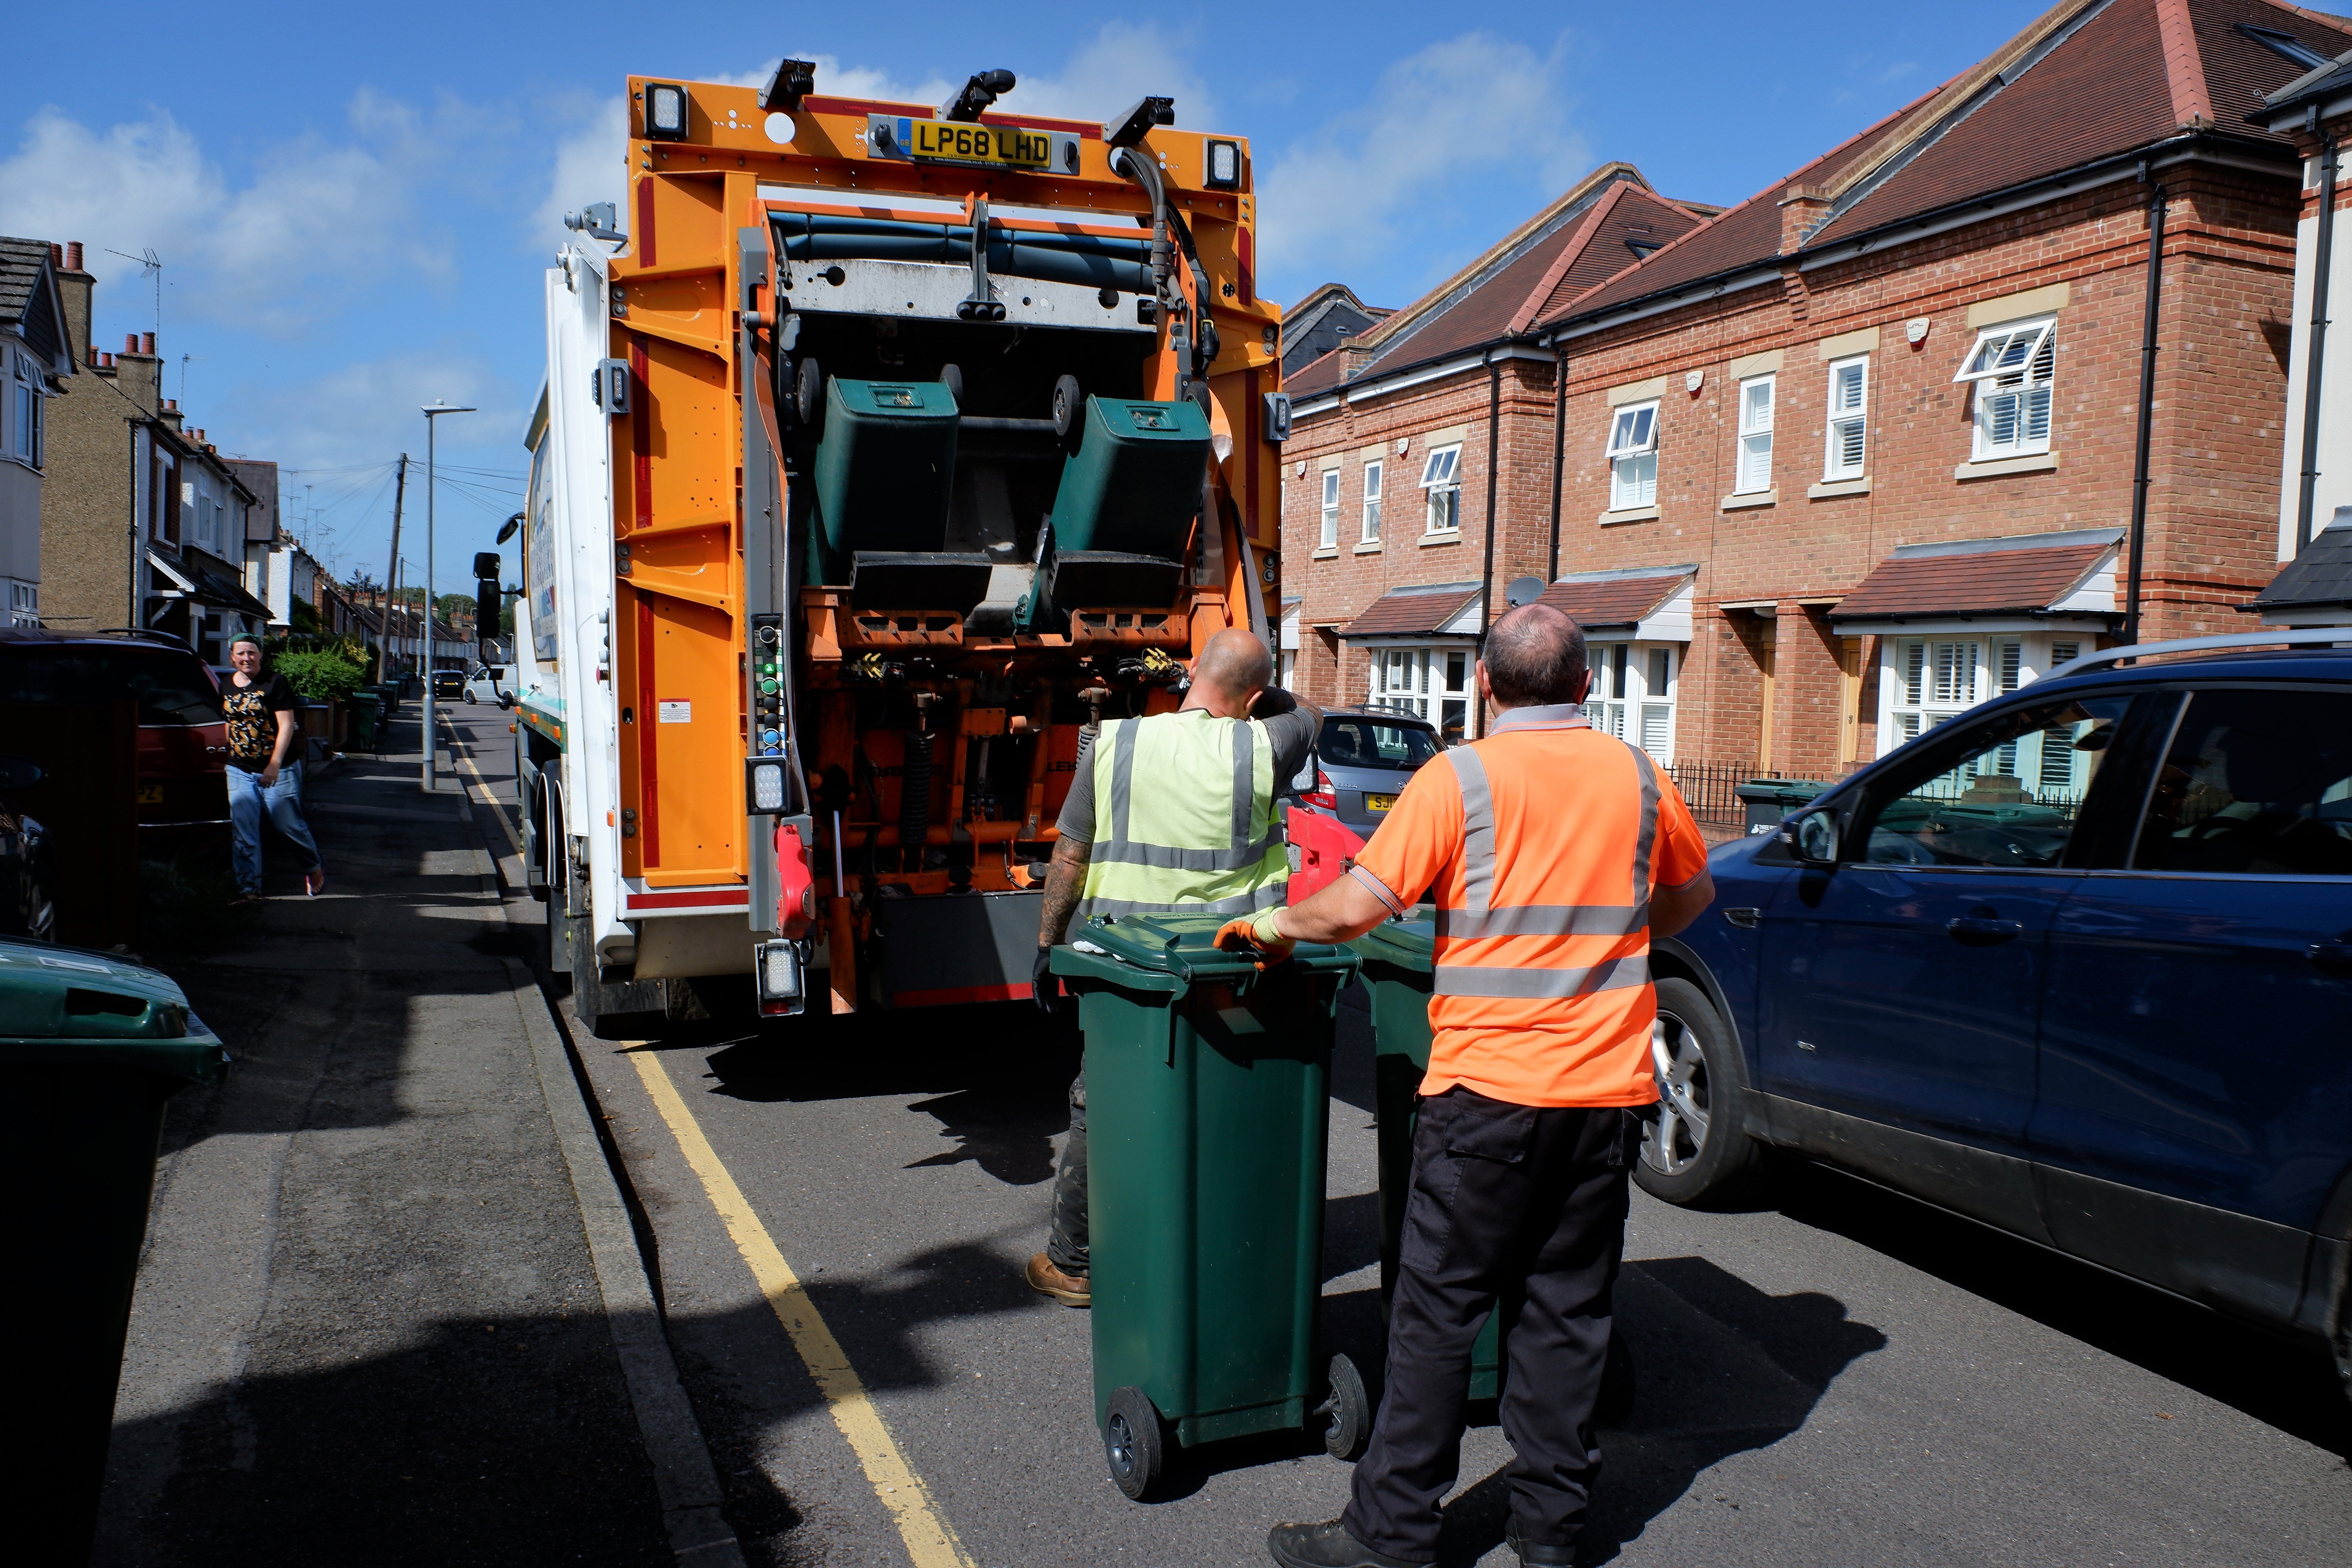 Bank holiday bin collection times: How to check your dates on Jubilee weekend